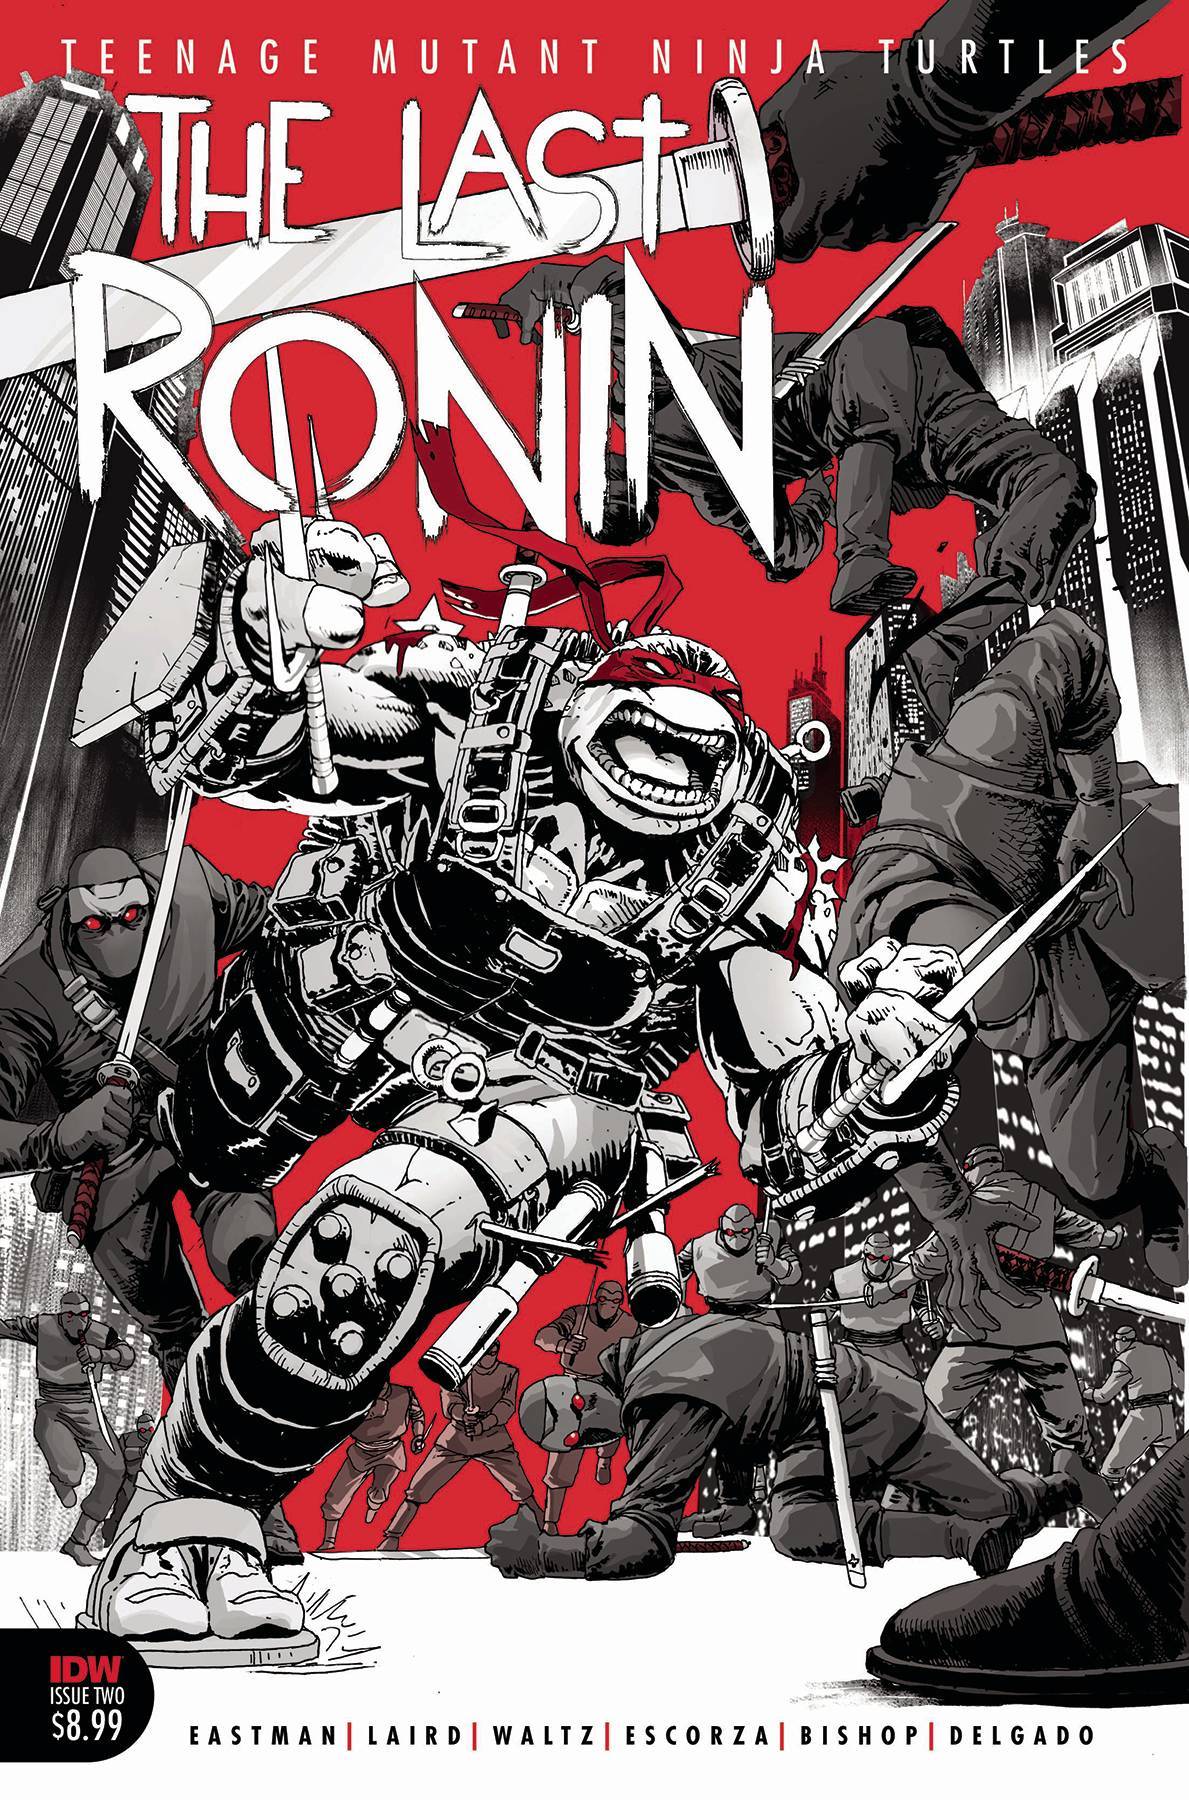 The One Stop Shop Comics & Games TMNT The Last Ronin #2 (Of 5) 3rd Print (09/22/2021) IDW PUBLISHING